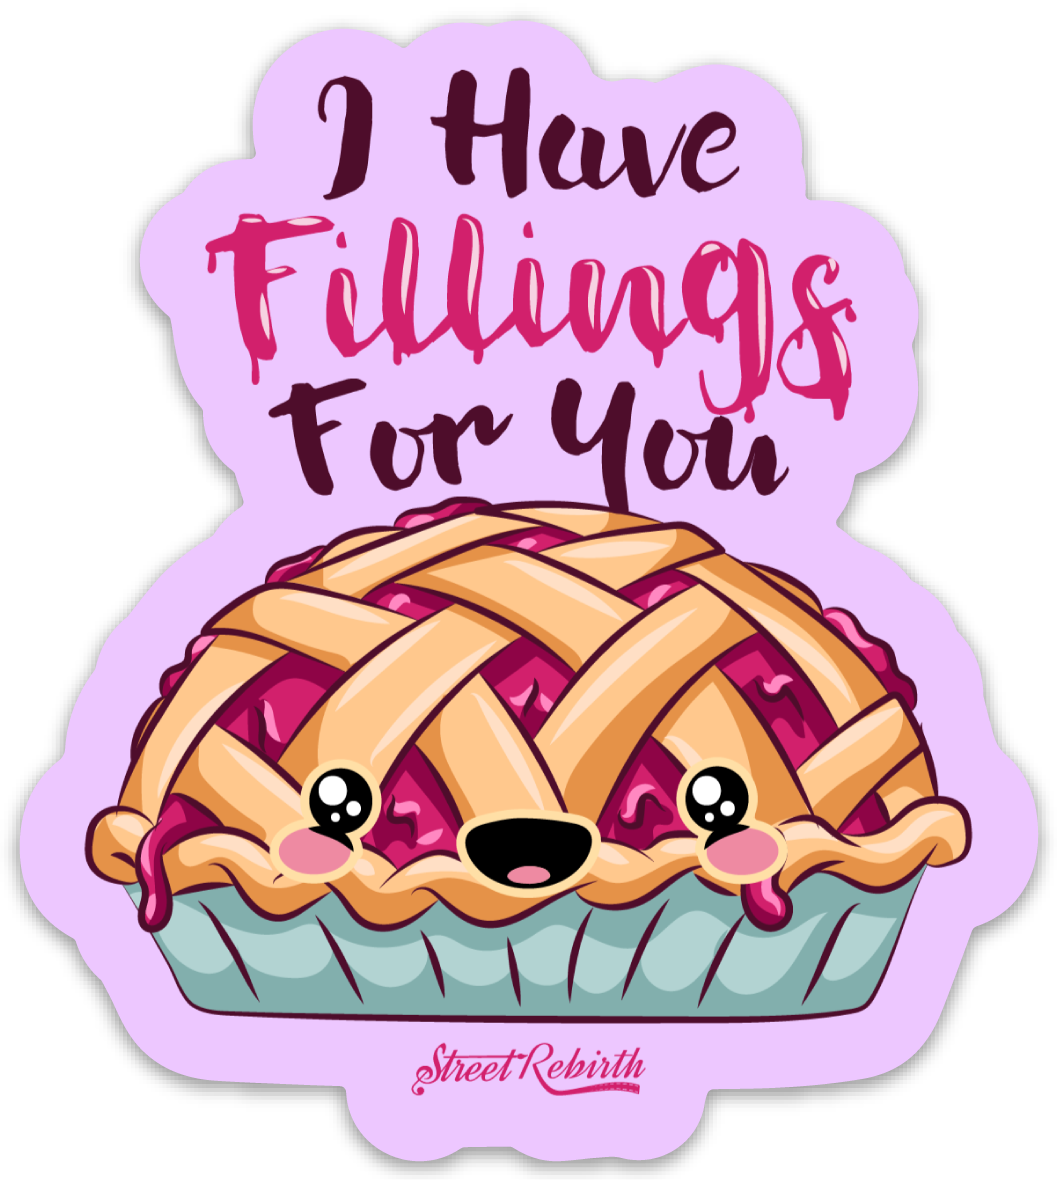 I Have Feelings For You Sticker – One 4 Inch Water Proof Vinyl Sticker – For Hydro Flask, Skateboard, Laptop, Planner, Car, Collecting, Gifting